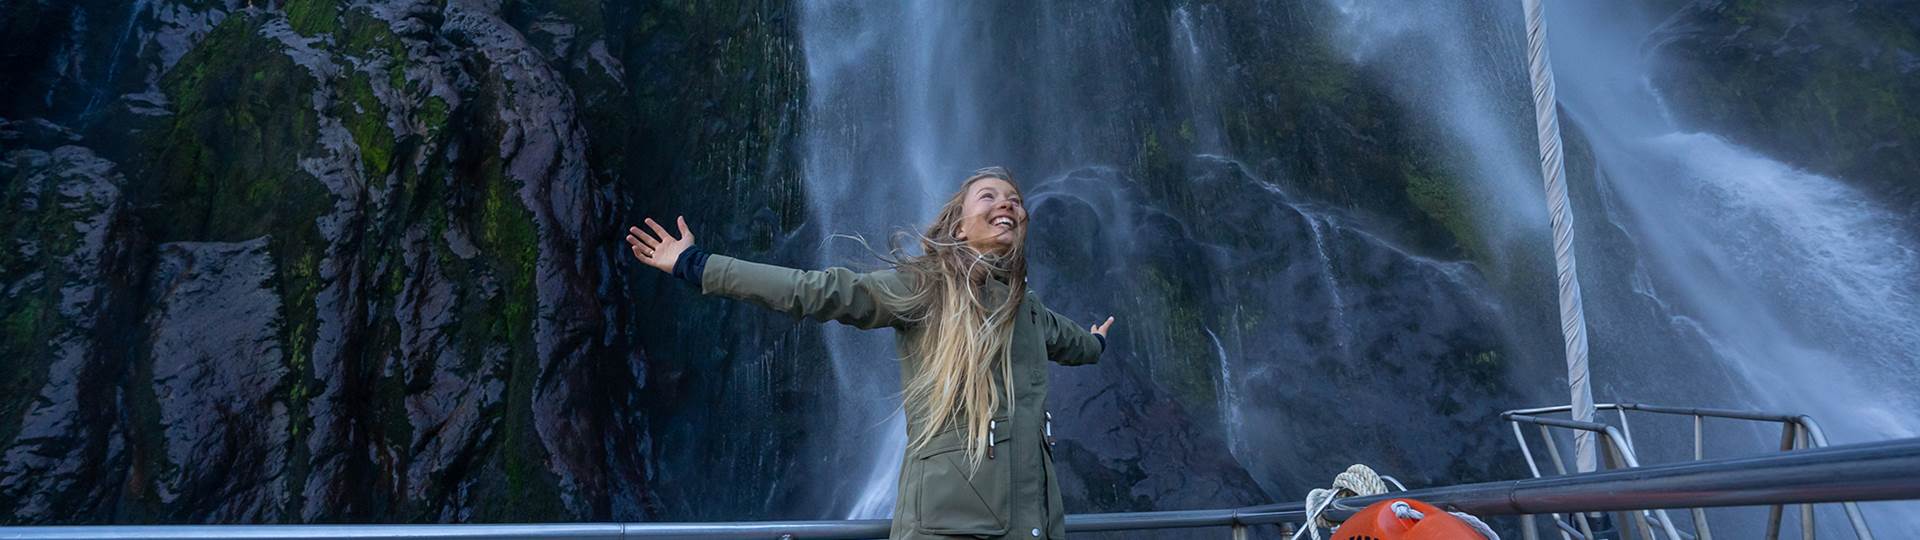 Woman stands under waterfall in Milford Sound